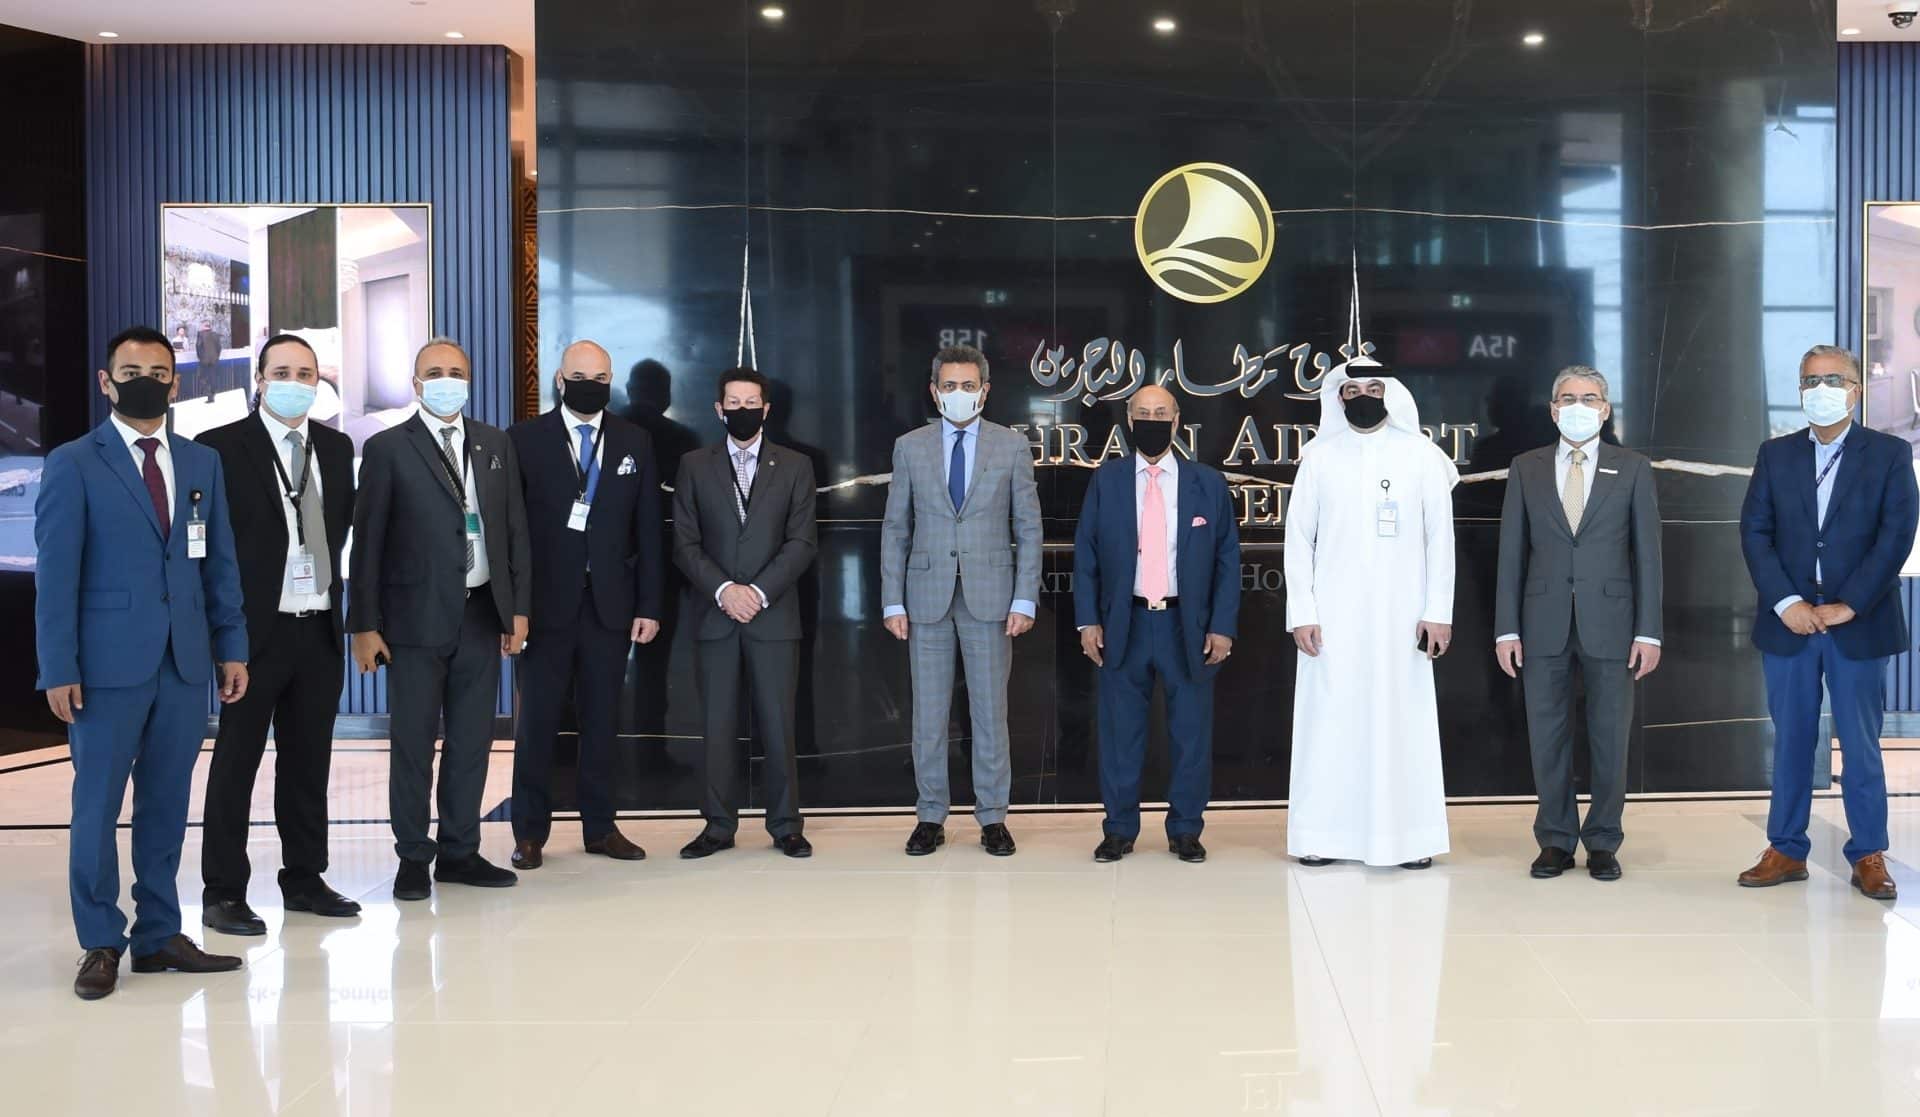 Bahrain Airport Hotel Group Picture